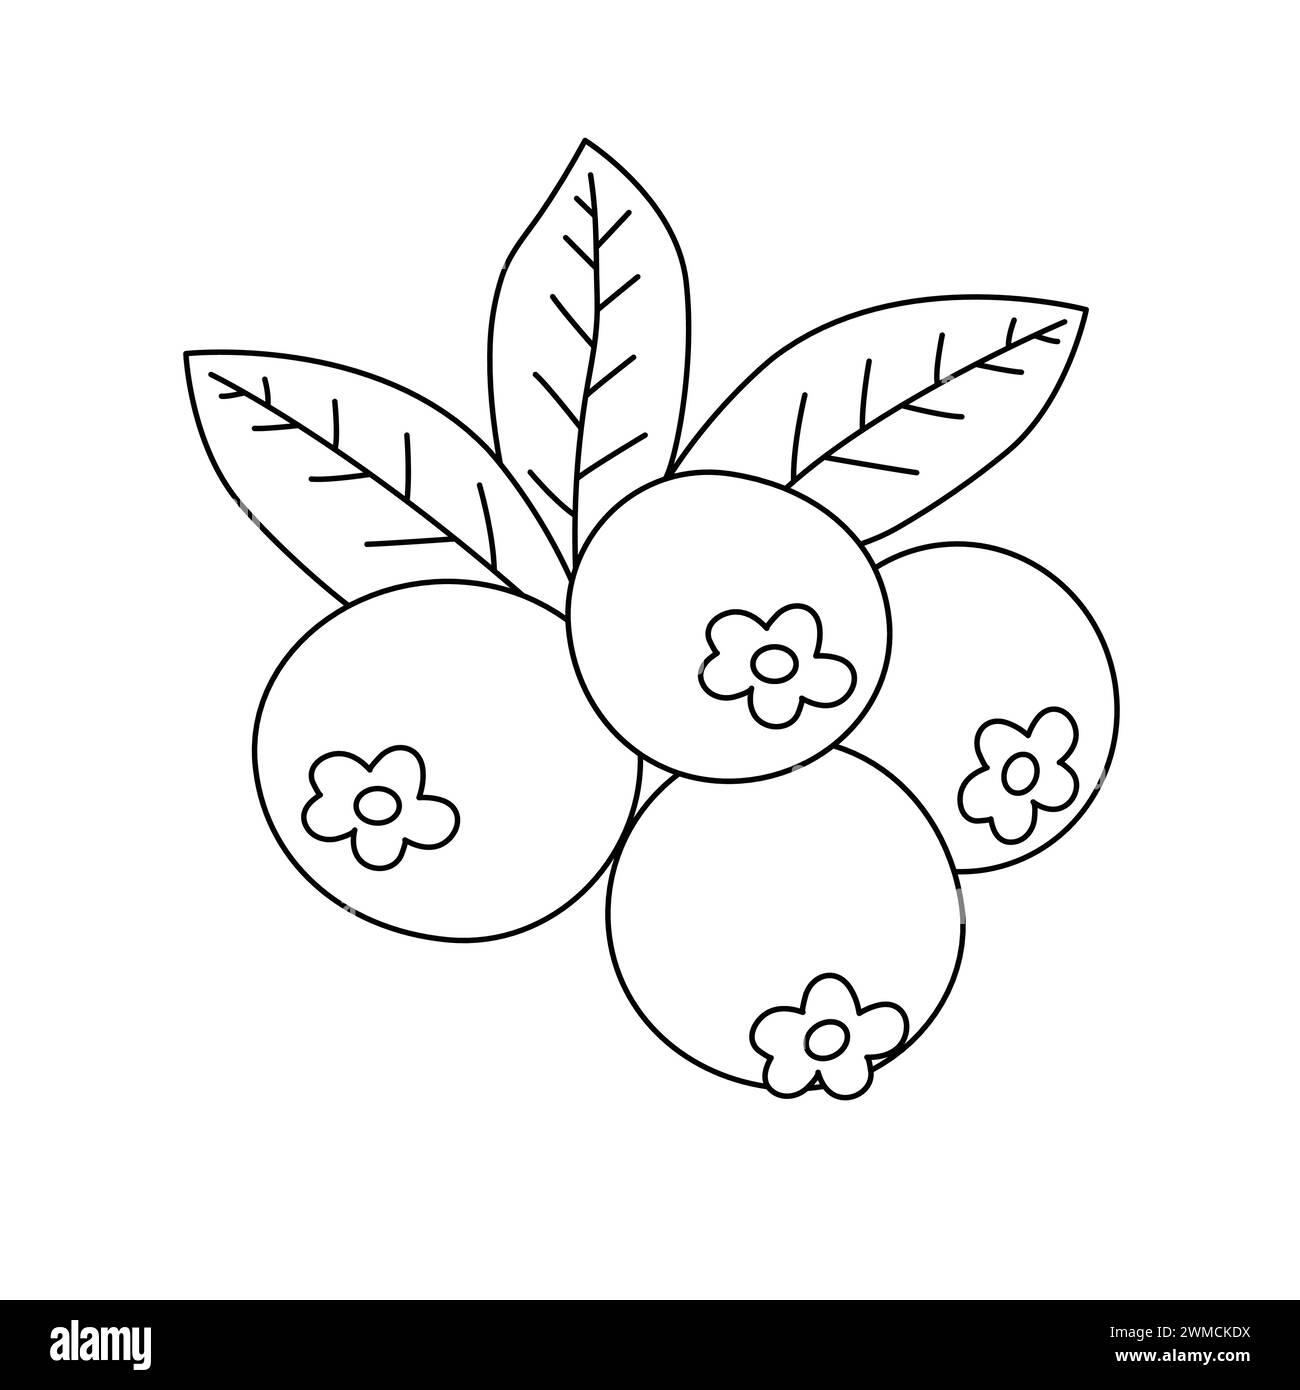 Blueberry Coloring Book. Fruits Coloring Pages For Kids And Adults. Blueberries With Leaves Vector Outline Illustration Stock Vector